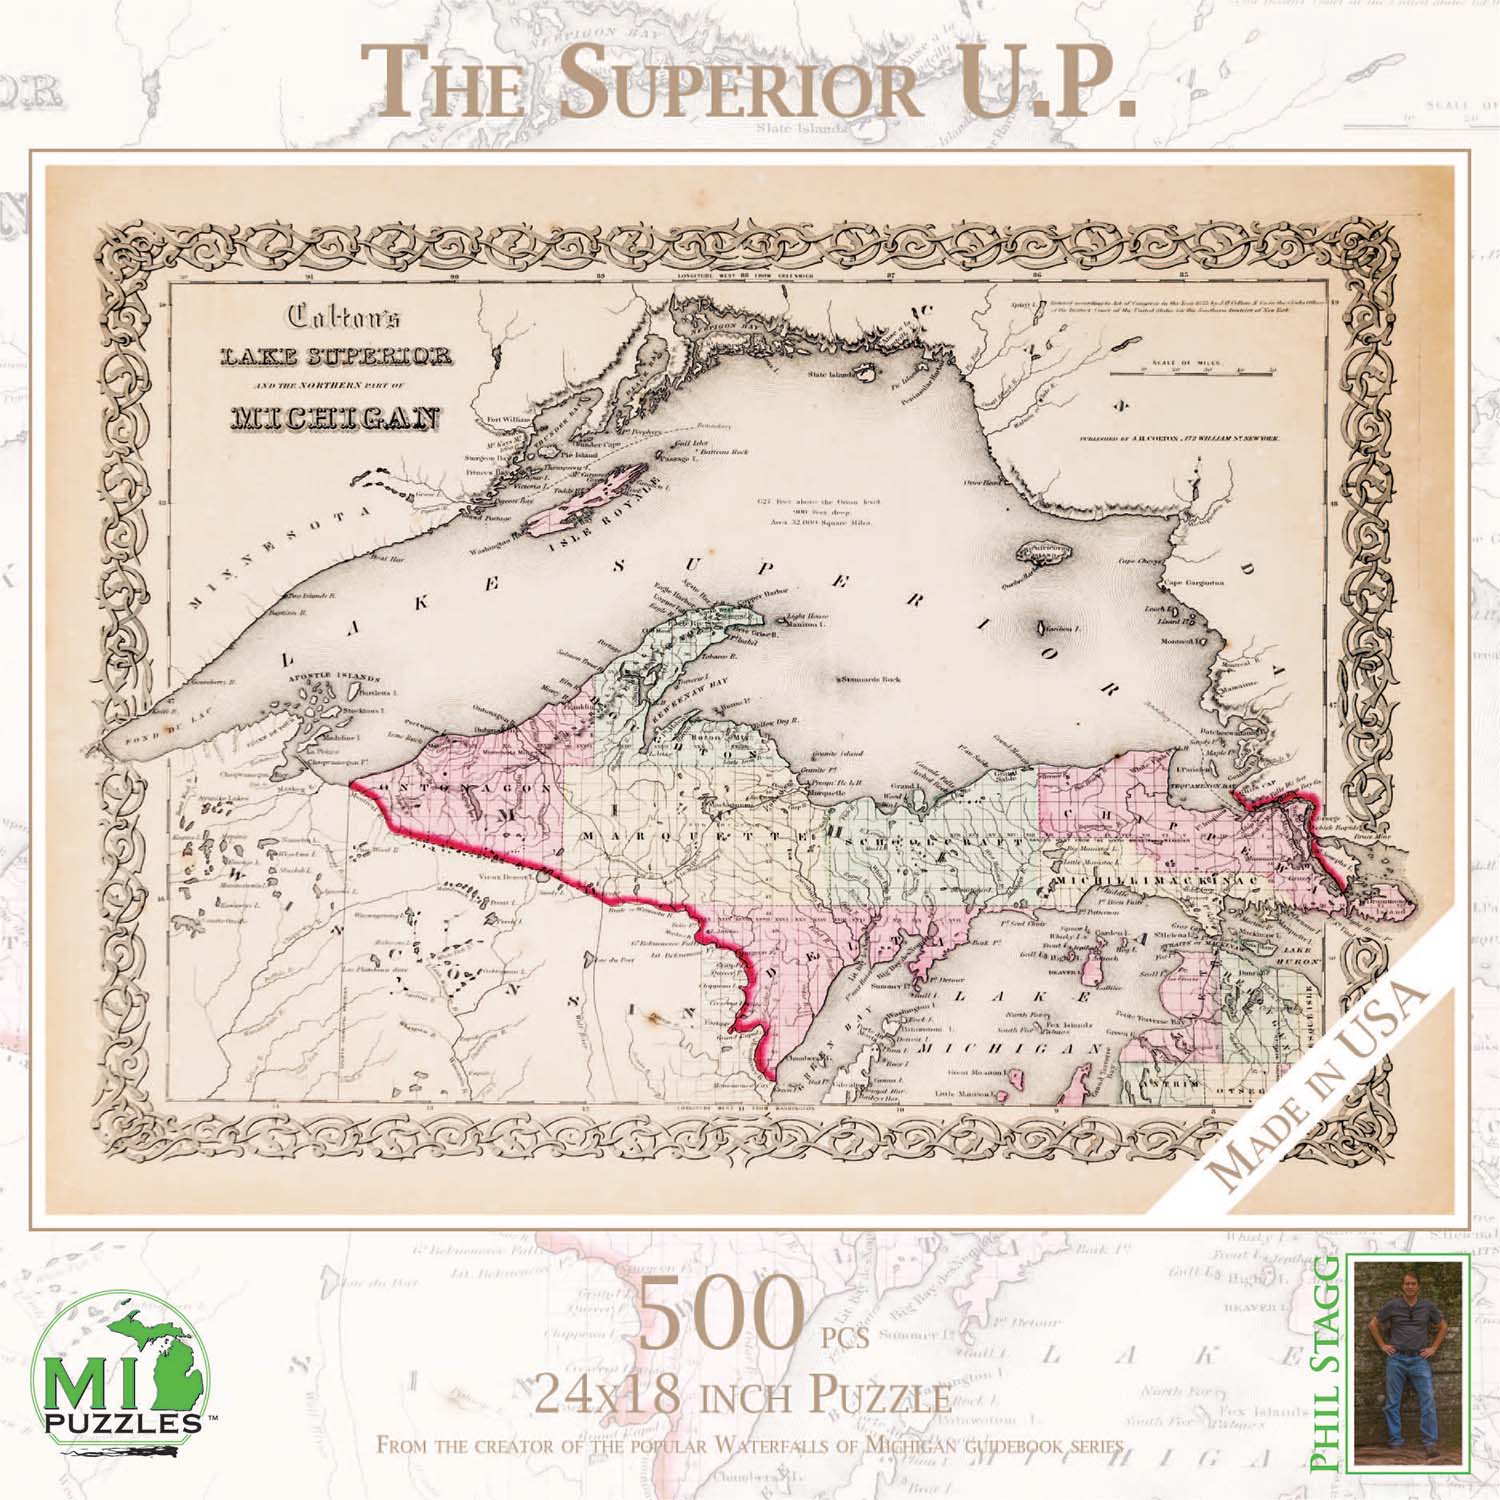 The Superior U.P. Maps & Geography Jigsaw Puzzle